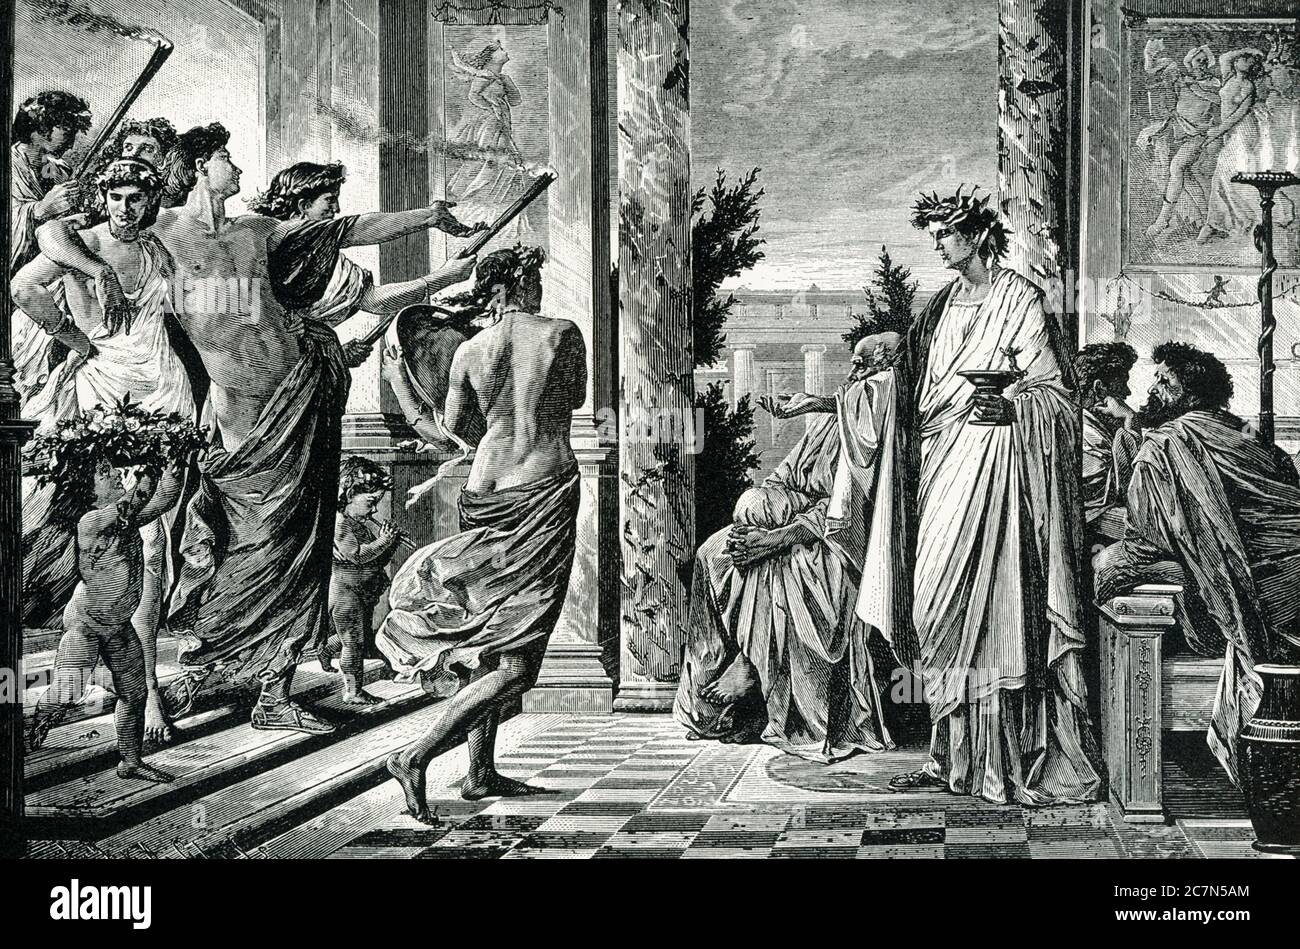 Alcibiades Interrupting the Banquet of Agathon. A characteristic picture of ancient Grecian life, this illustrates the story told in Plato’s “Banquet” or Symposium. The  young Alcibiades (later became Athenian staesman)  and a band of drunken revellers burst in upon the feast at which the poet Agathon (lived 400s B.C.) is entertaining Socrates and others. The host meets the flower-crowned invaders, half in welcome, half in rebuke. Stock Photo